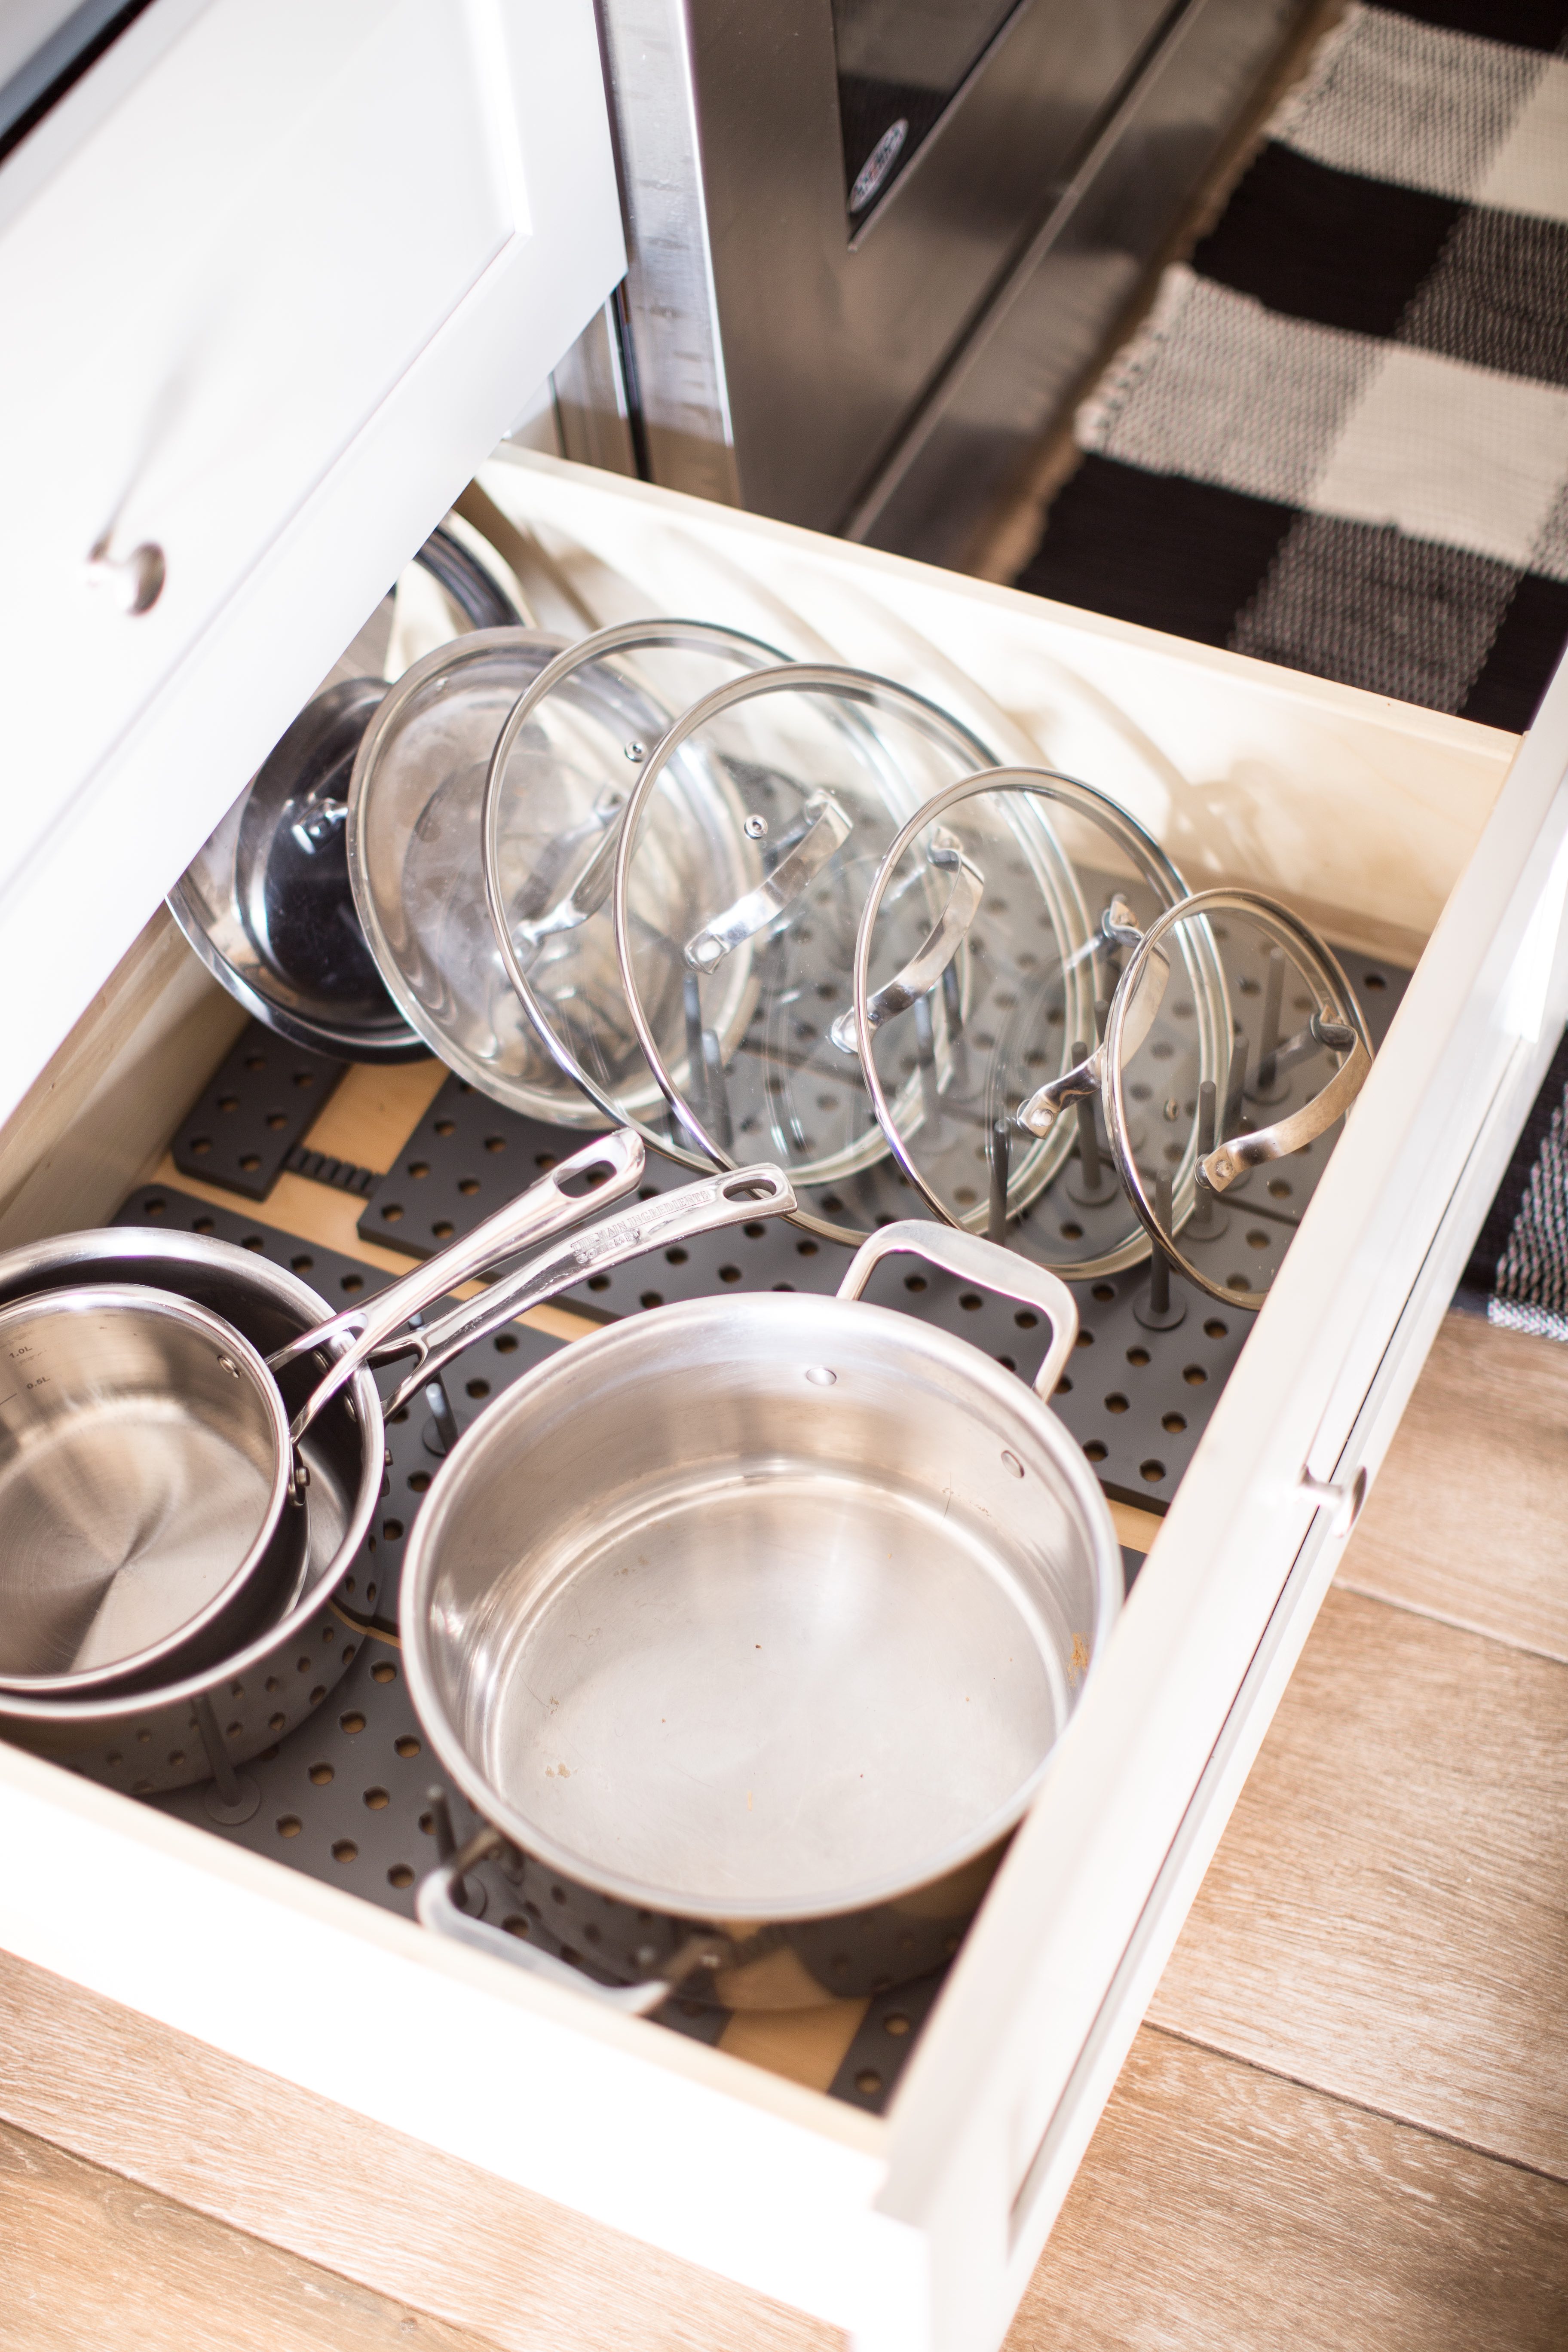 DIY Knock-Off Organization for Pots & Pans ~ How to Organize Your